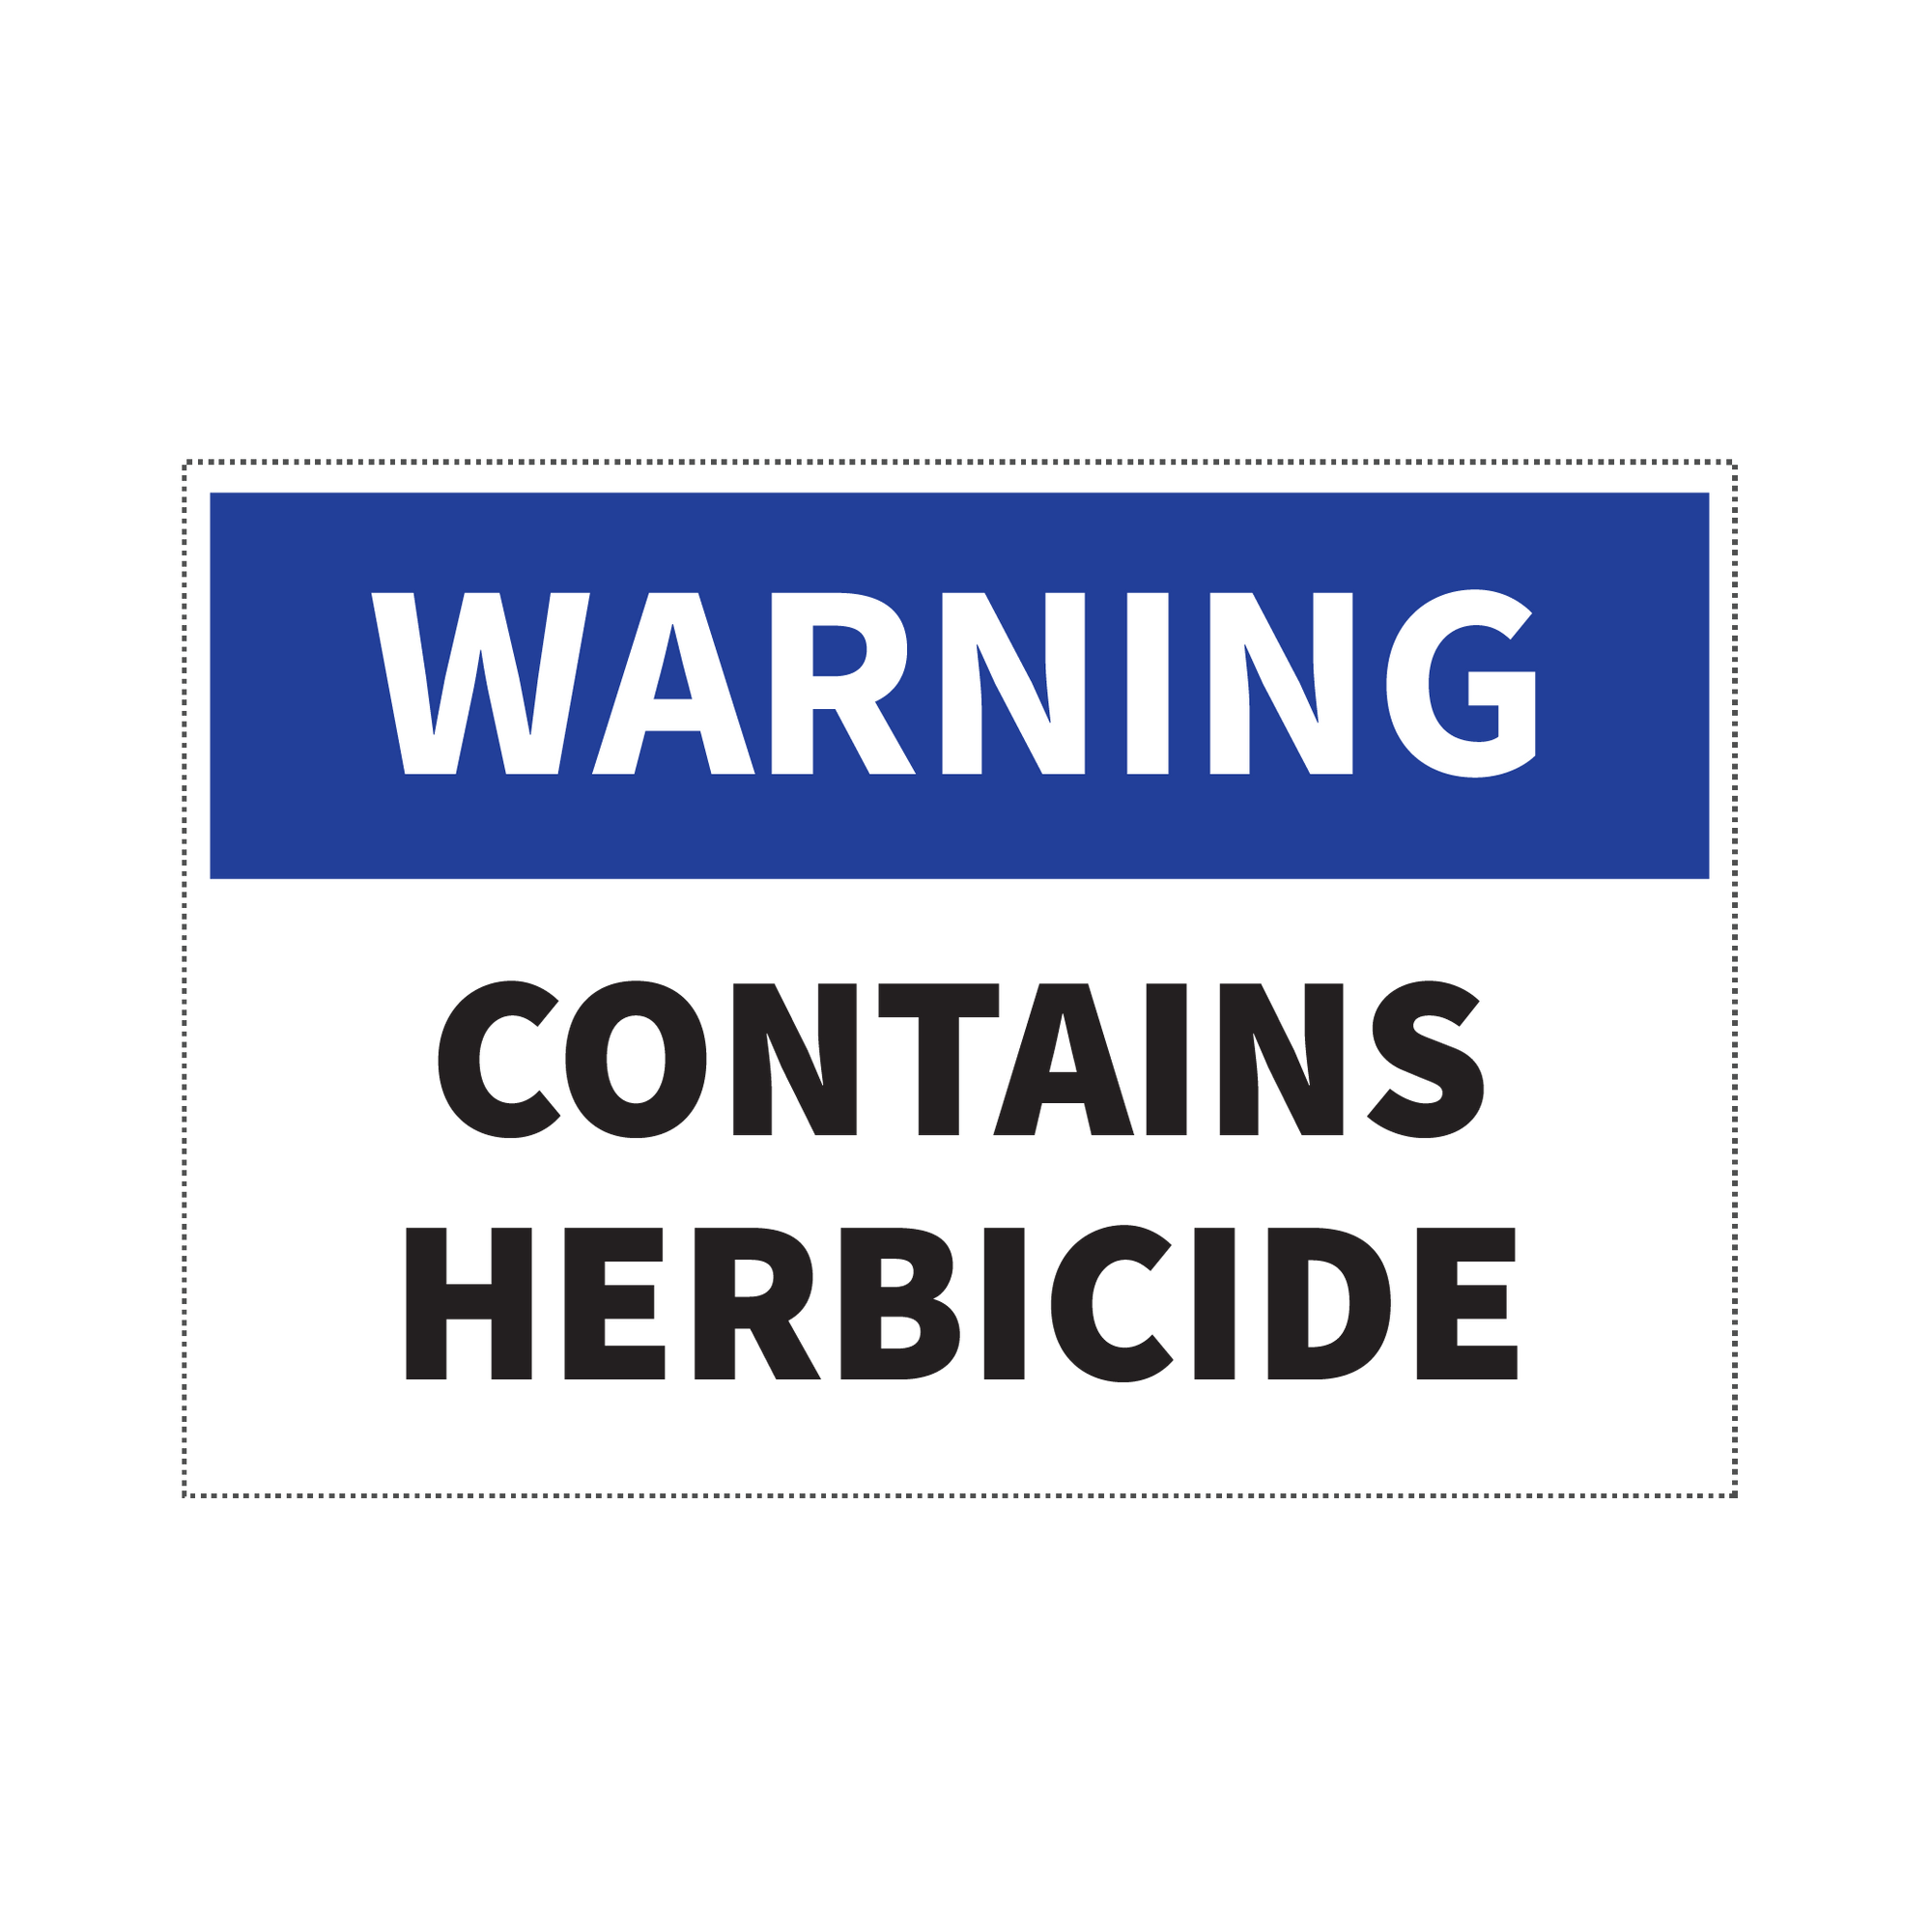 WARNING CONTAINS HERBICIDE - S28